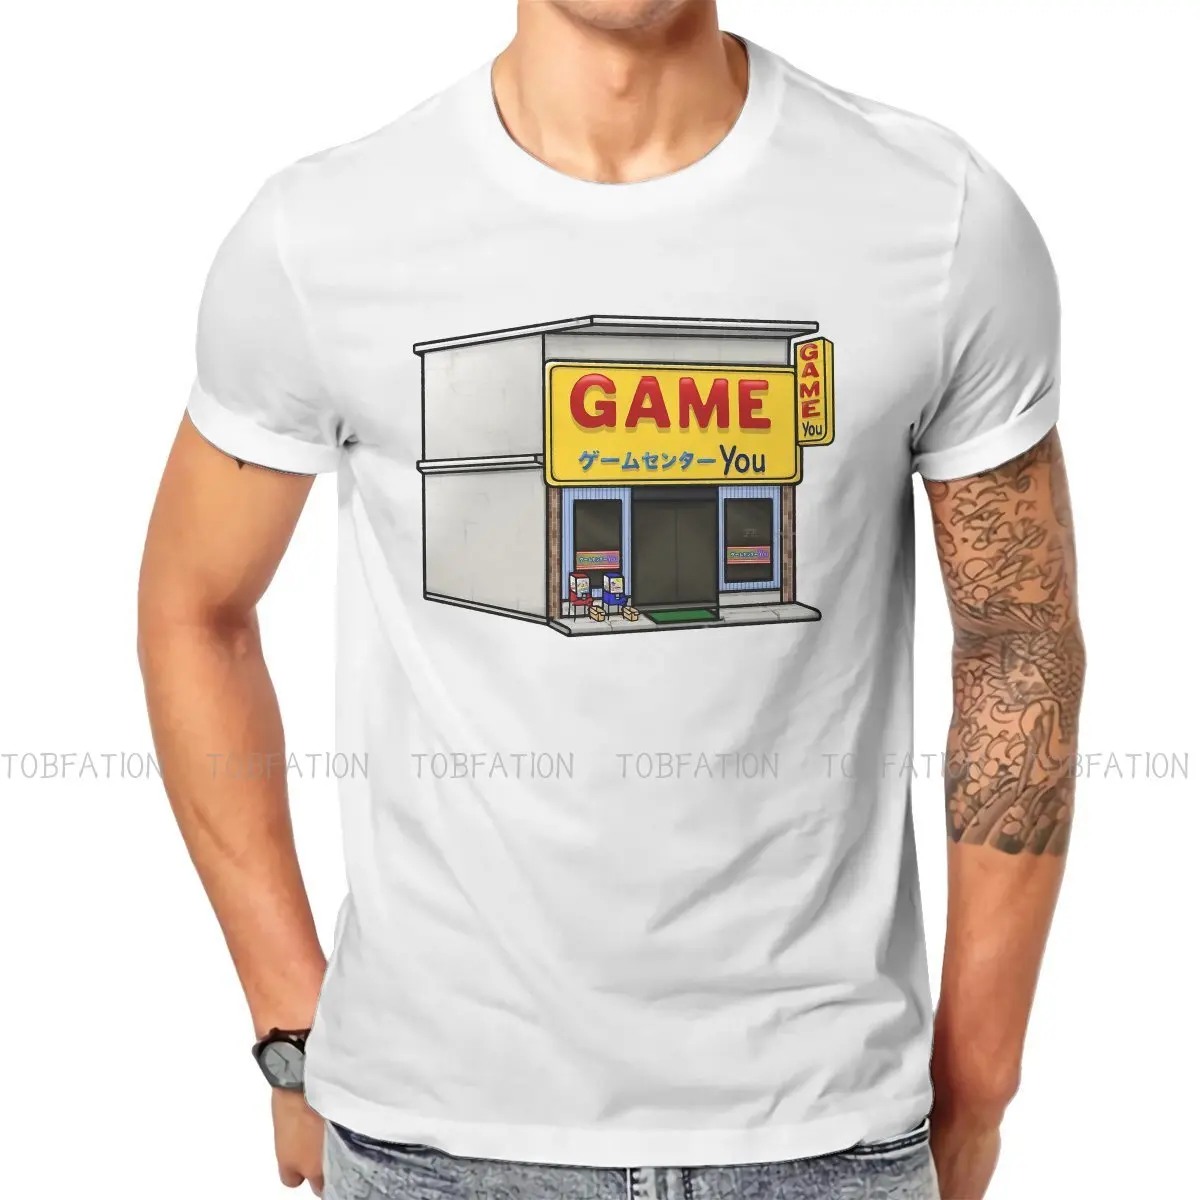 

Center Graphic TShirt Shenmue Action Adventure Game Printing Tops Leisure T Shirt Male Short Sleeve Gift Idea